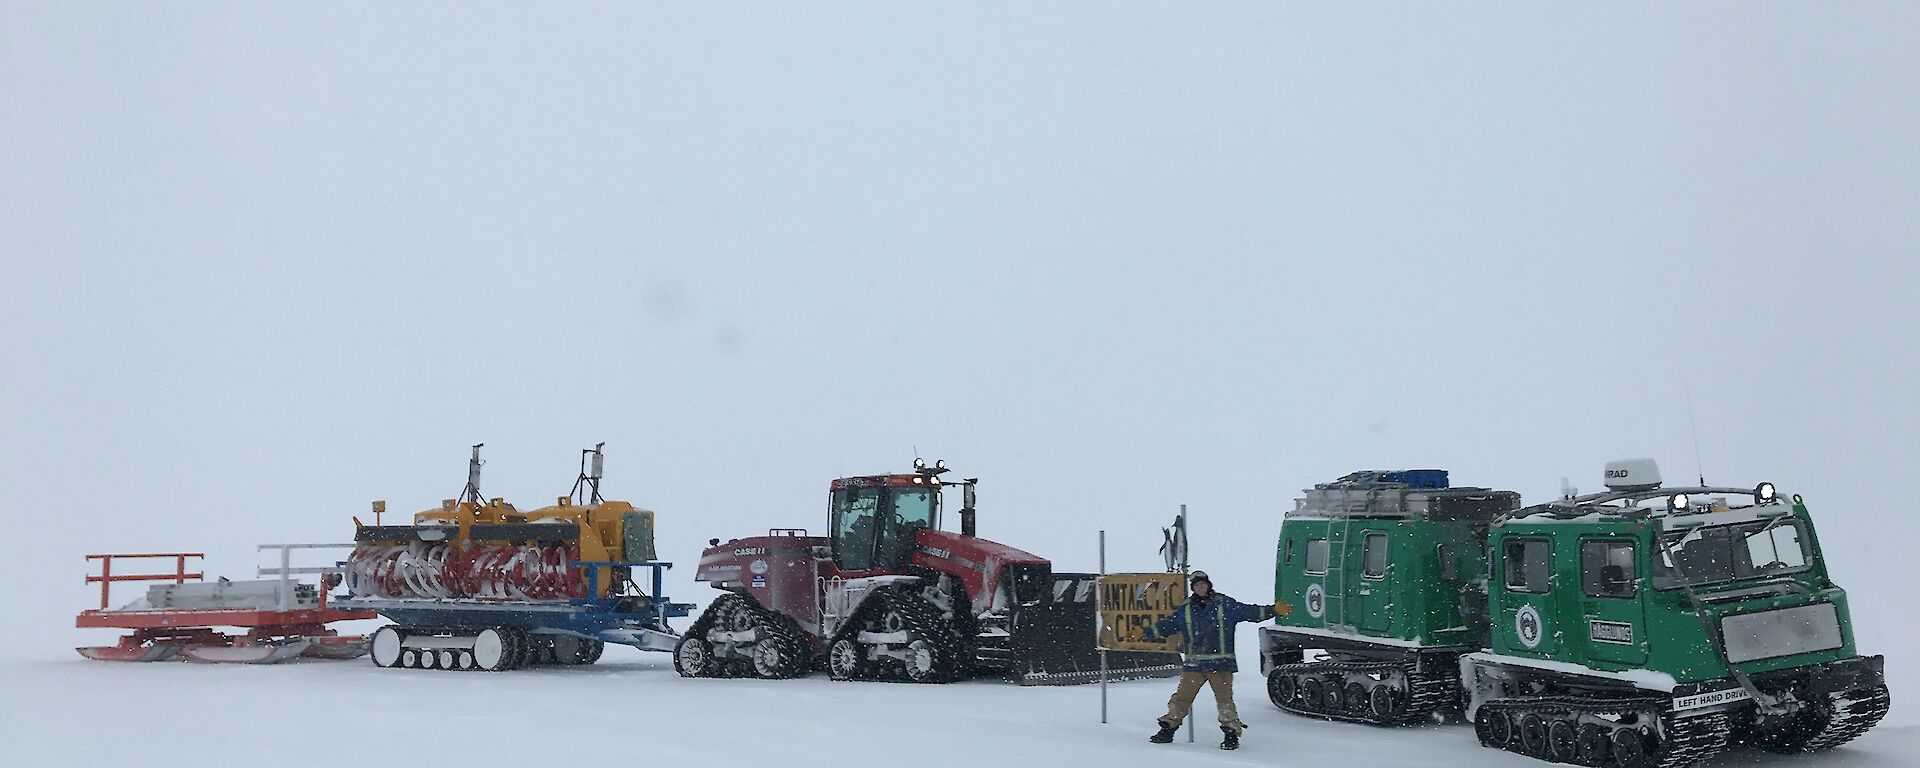 Man stands at Antarctic circle sign with vehicles lined up behind — green Hägglunds on right and large tractor with two trailers attached on left, on middle trailer are two yellow snow blowers.